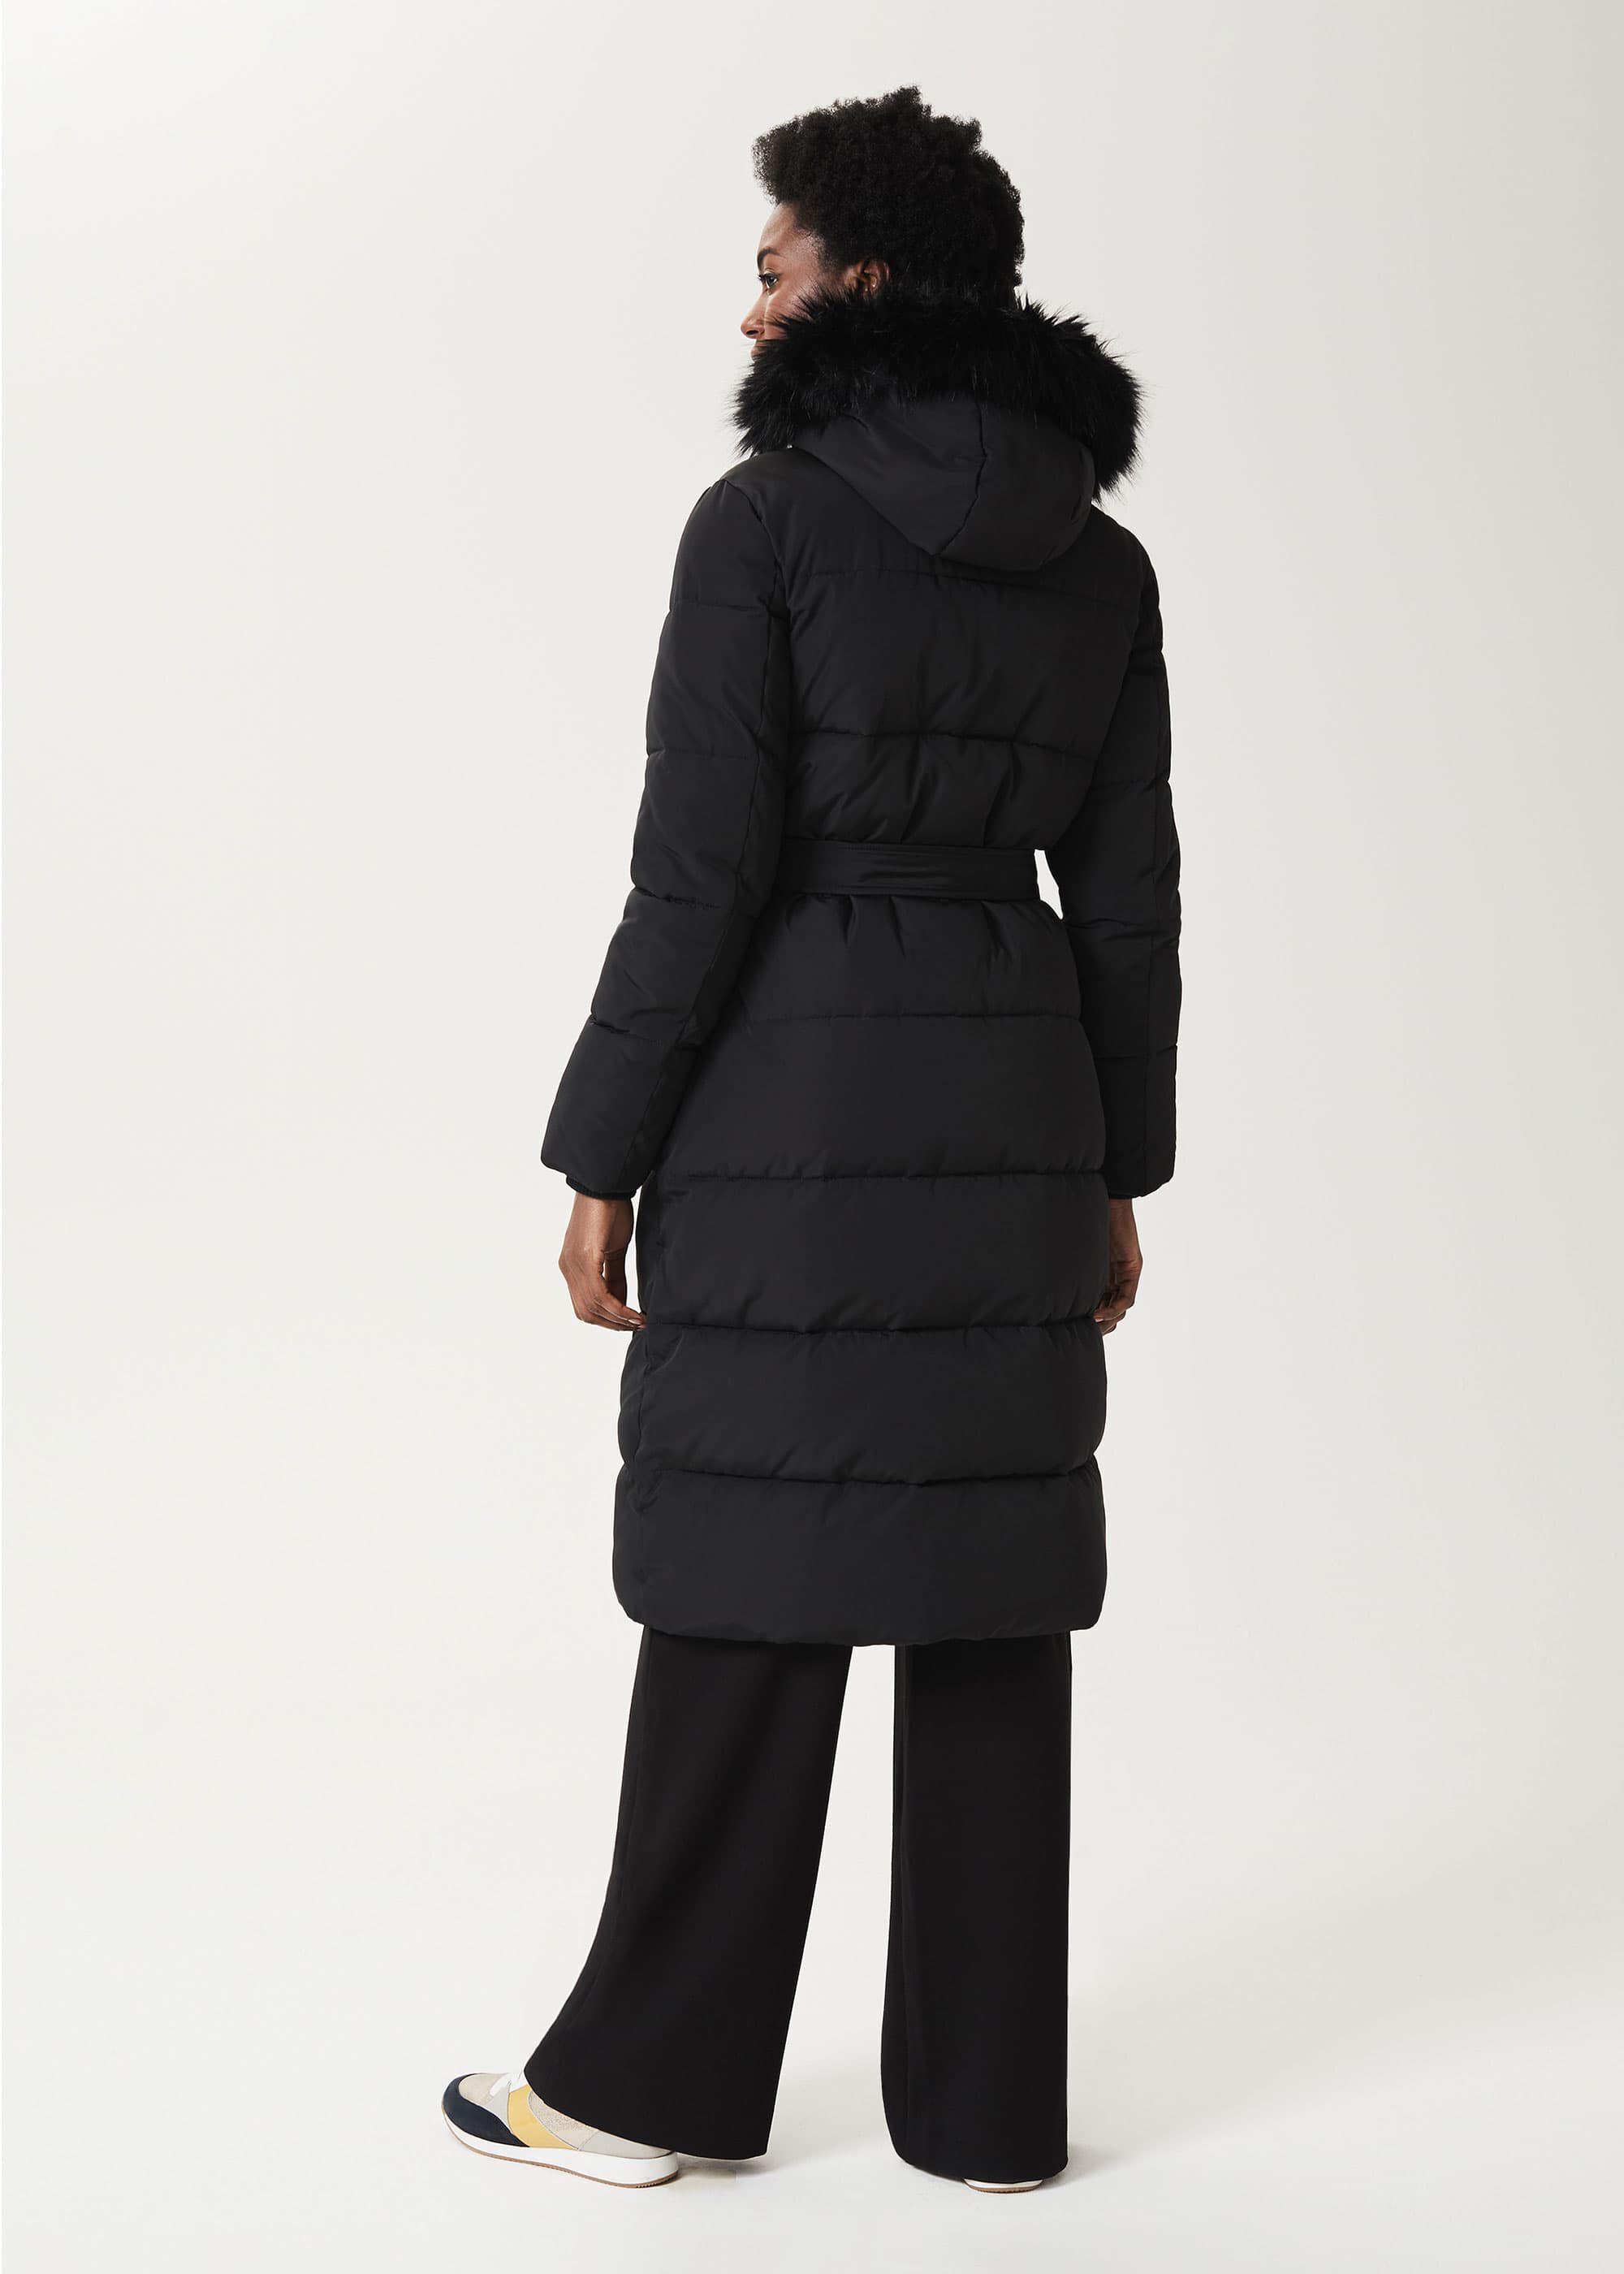 Libby Belted Puffer Jacket With Hood 